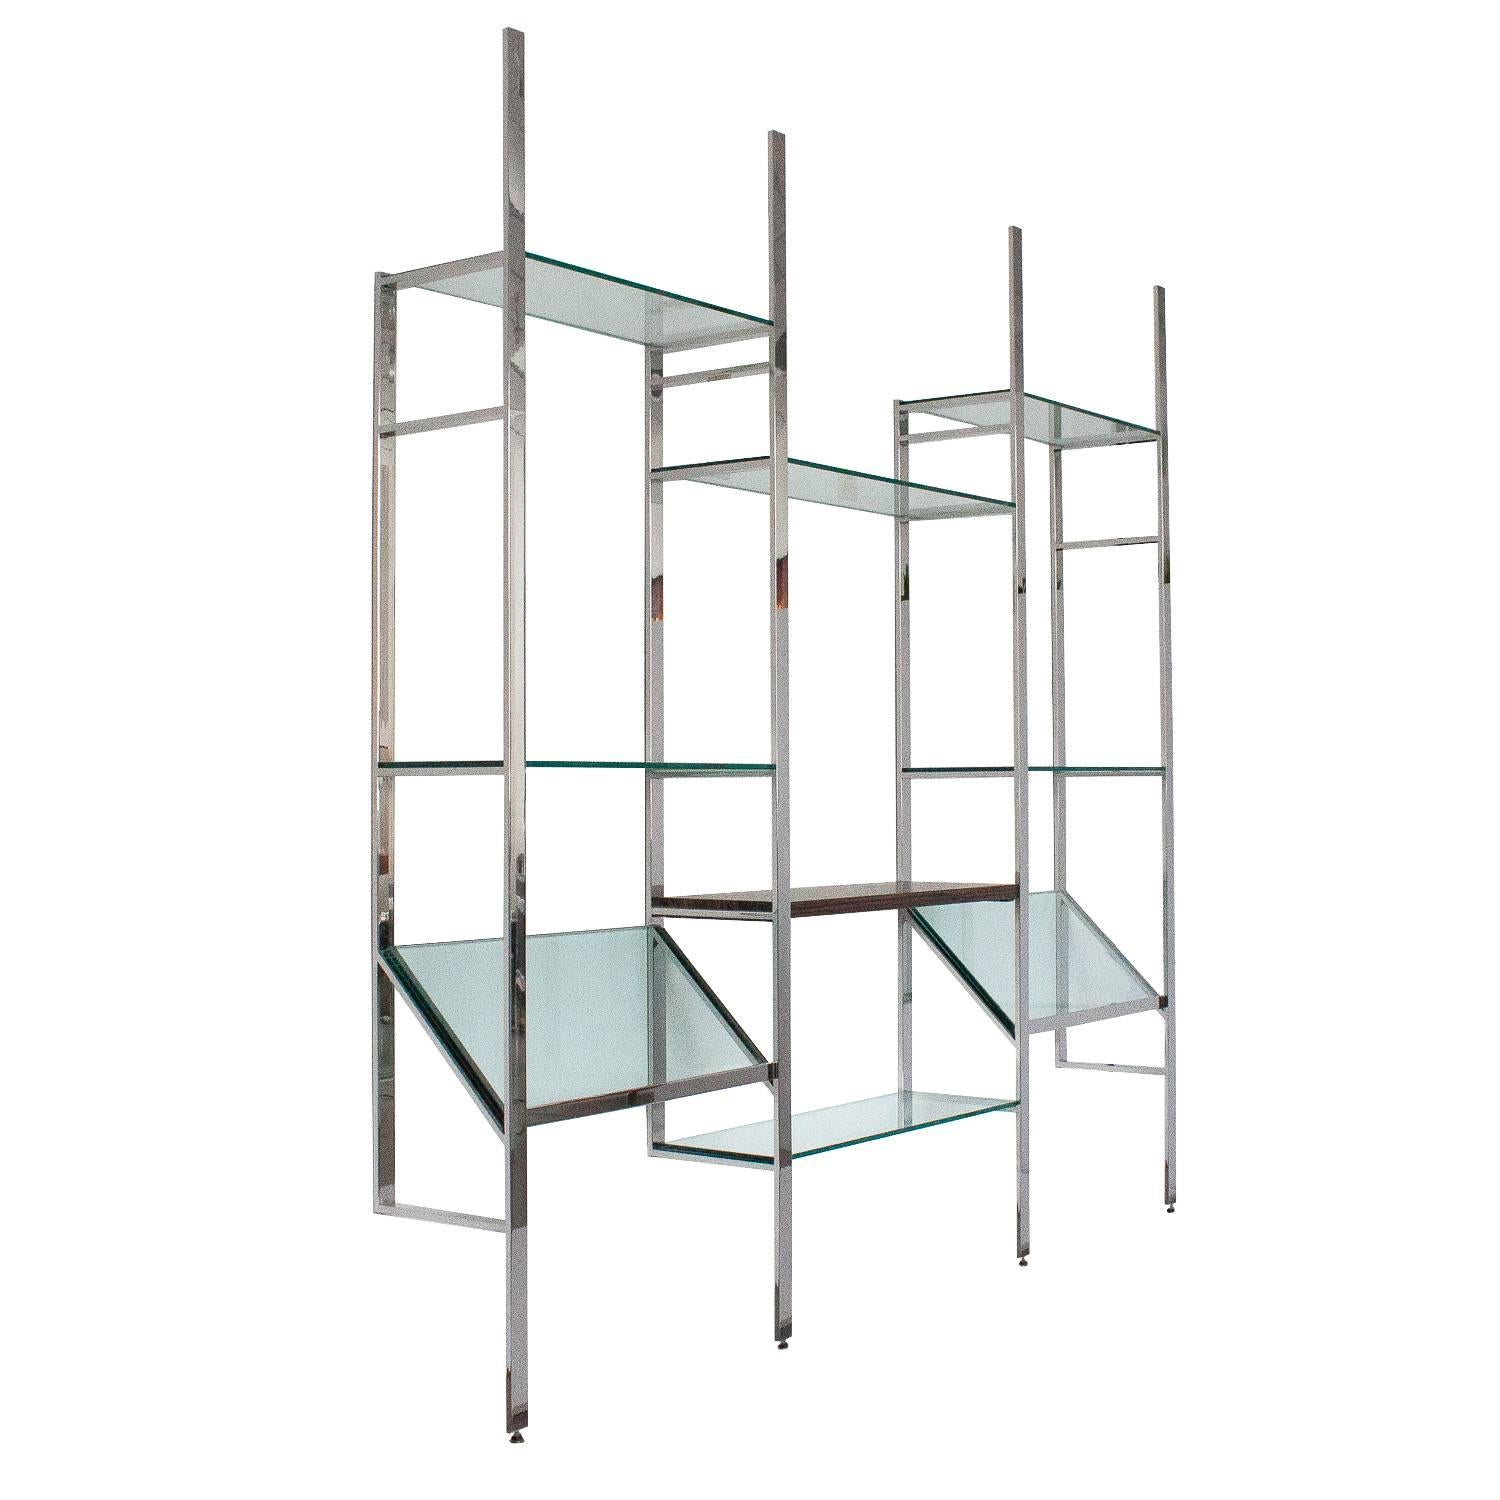 Wall-mounted shelving system by Milo Baughman. Four polished chrome-plated 1.5" W steel wall-mounted vertical supports. Six 3/8th inch glass shelves and two angled glass magazine / art display shelves. Macassar ebony wood central shelf.